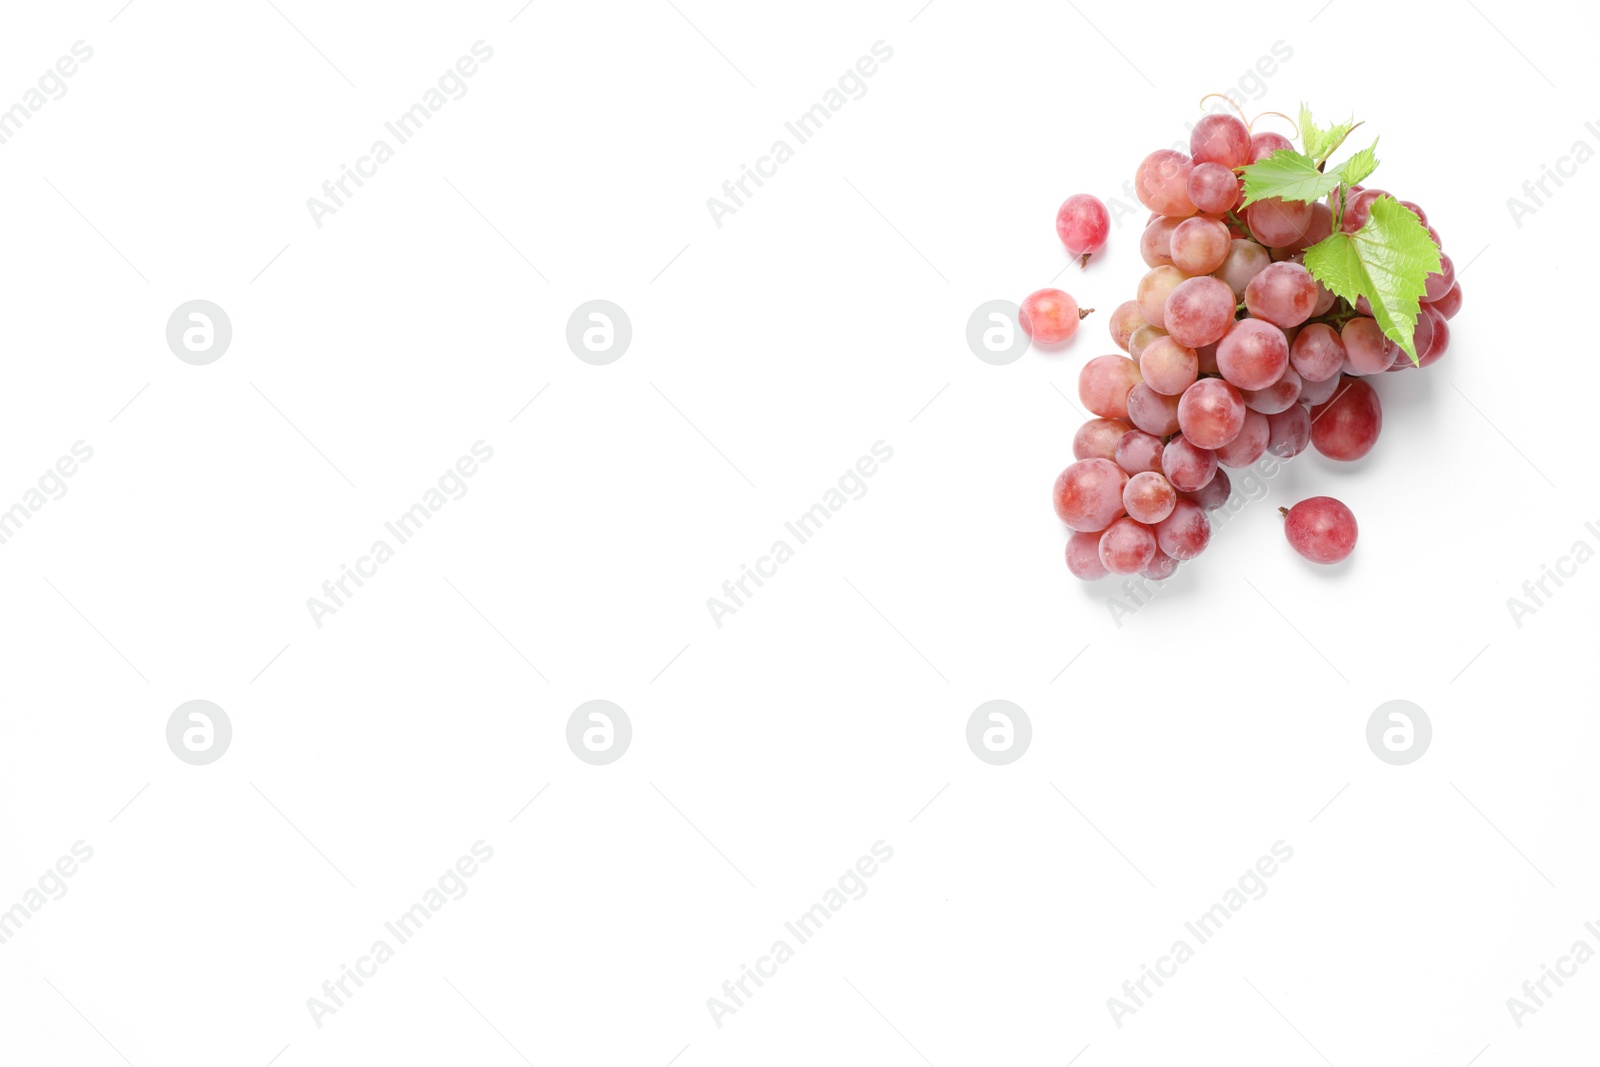 Photo of Bunch of ripe red grapes with green leaves on white background, top view